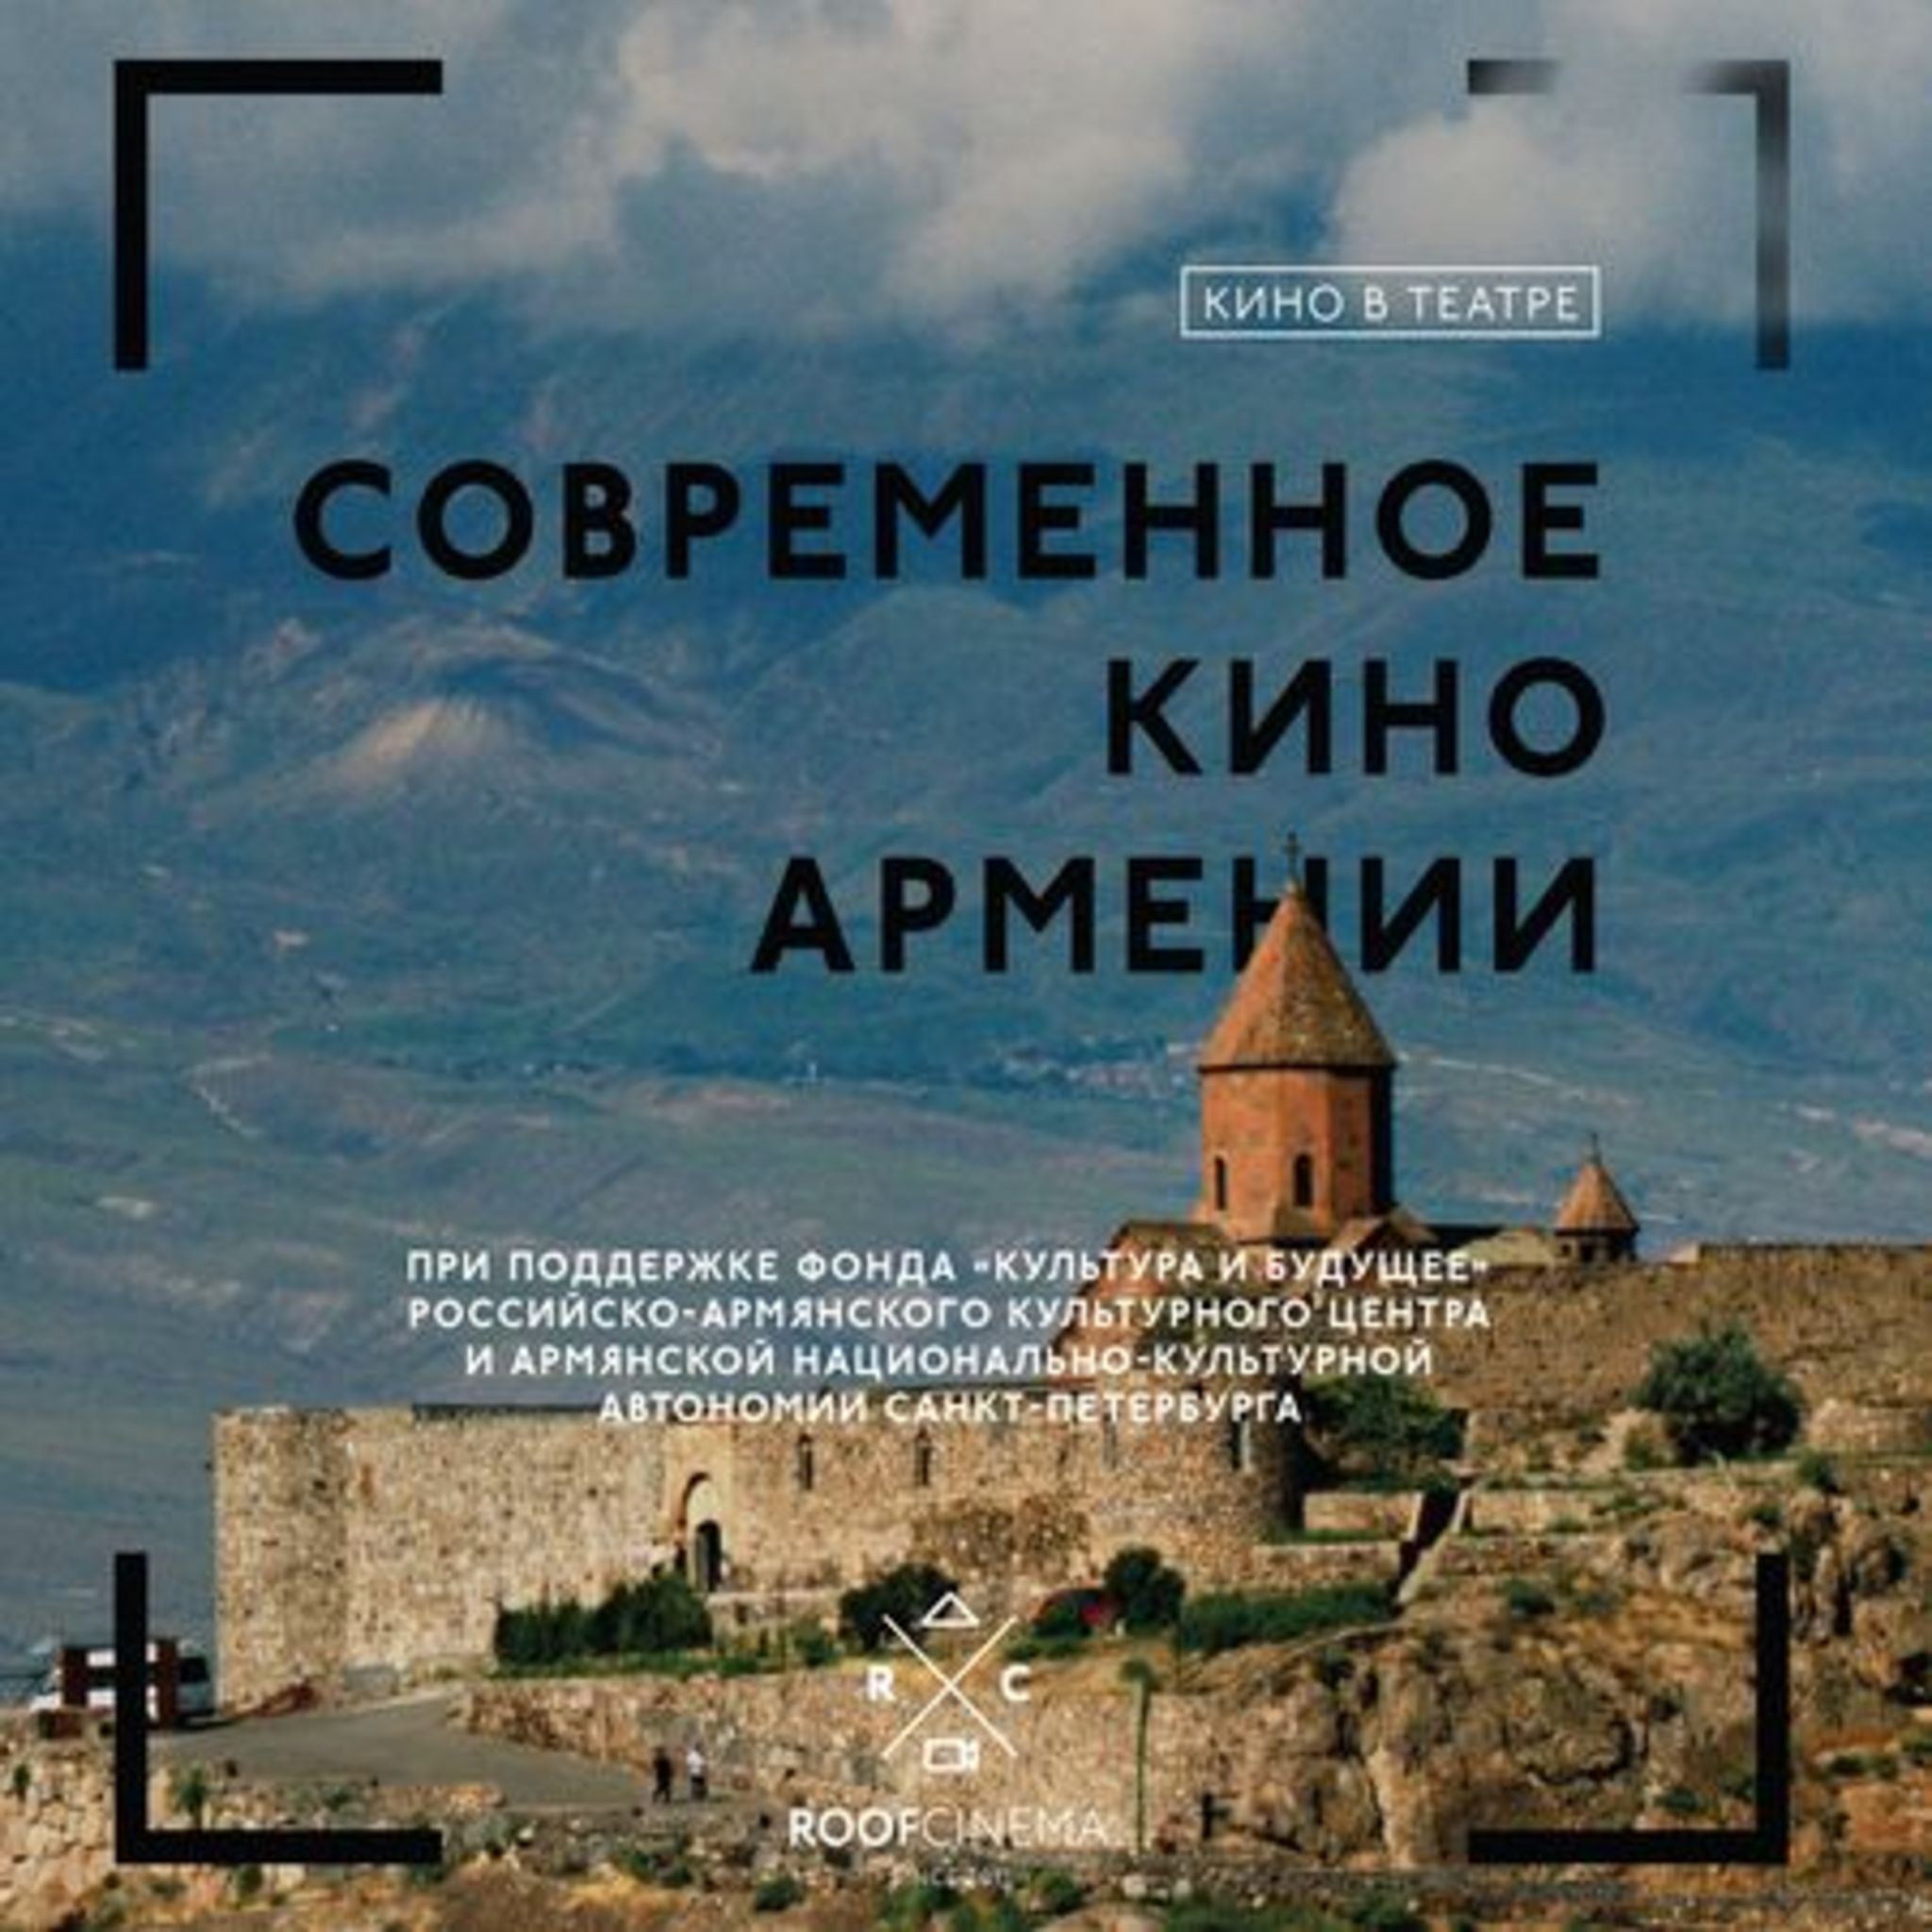 Festival of Contemporary Cinema of Armenia on the New Stage of the Alexandrinsky Theatre